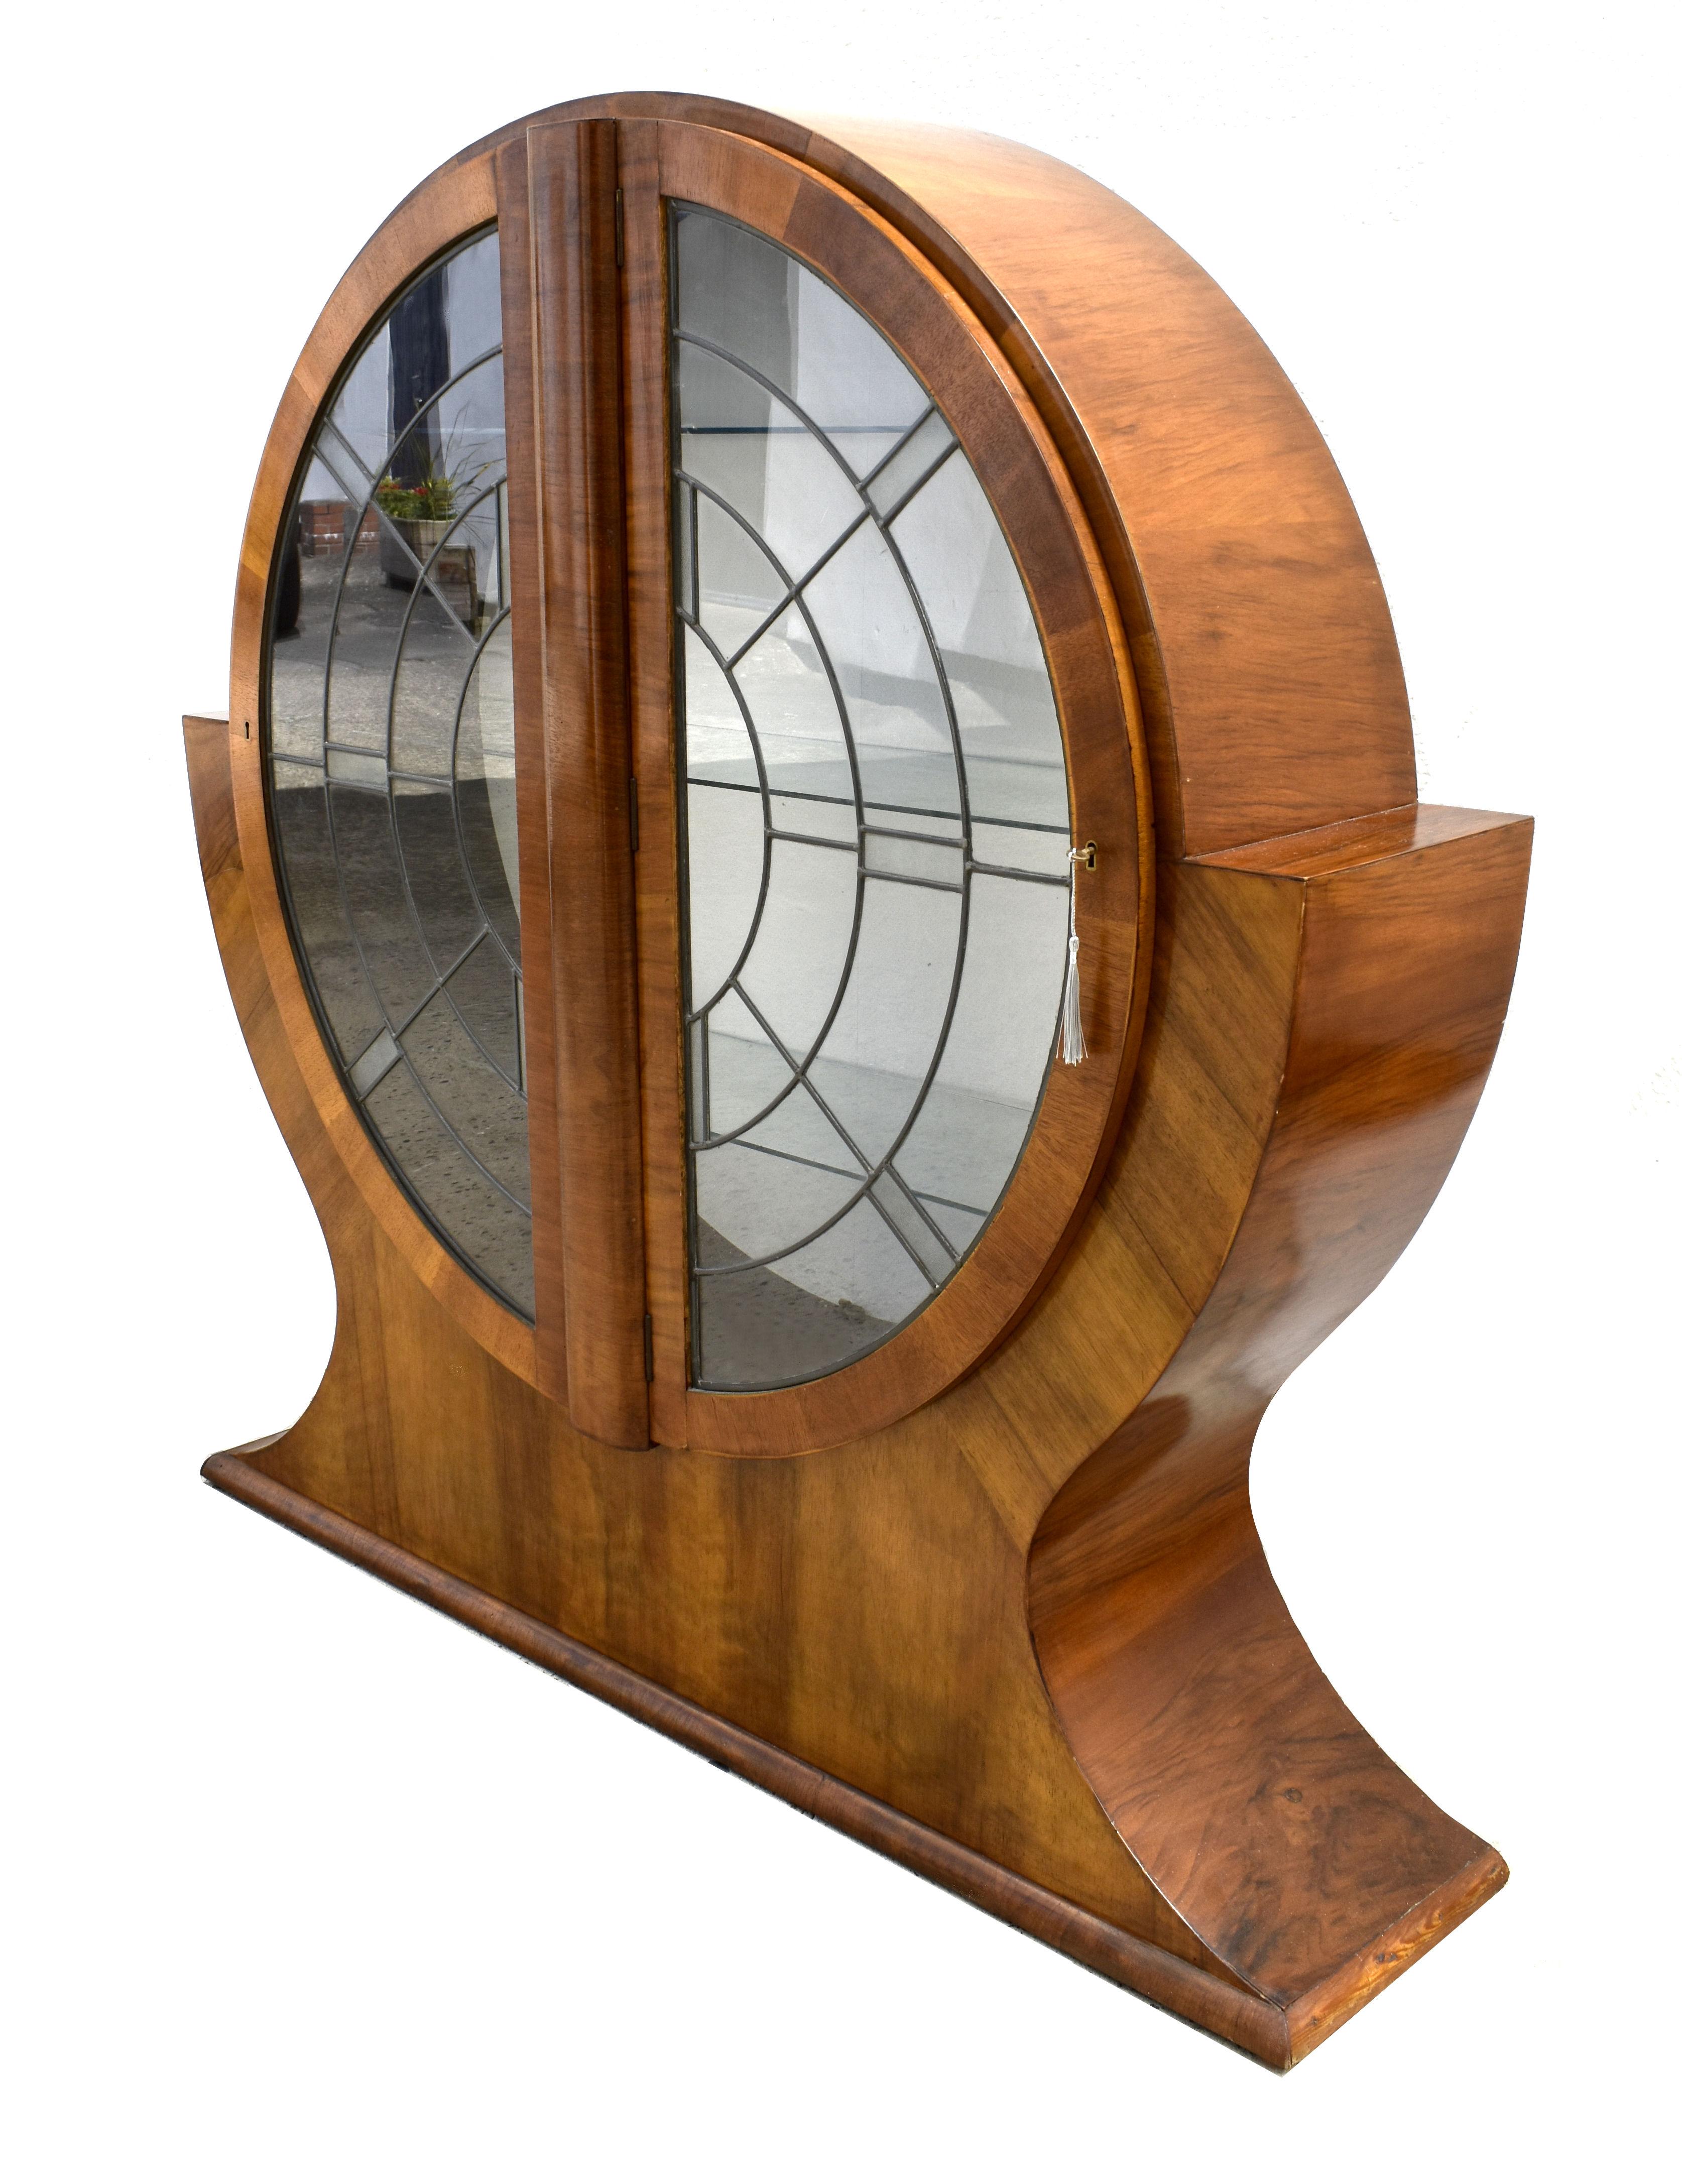 This is a superb example of an English made Art Deco display cabinet, dating to the 1930s and very popular at the time for displaying your best 'china' usually displayed in what was known as the 'front room' which was mainly for show and used to